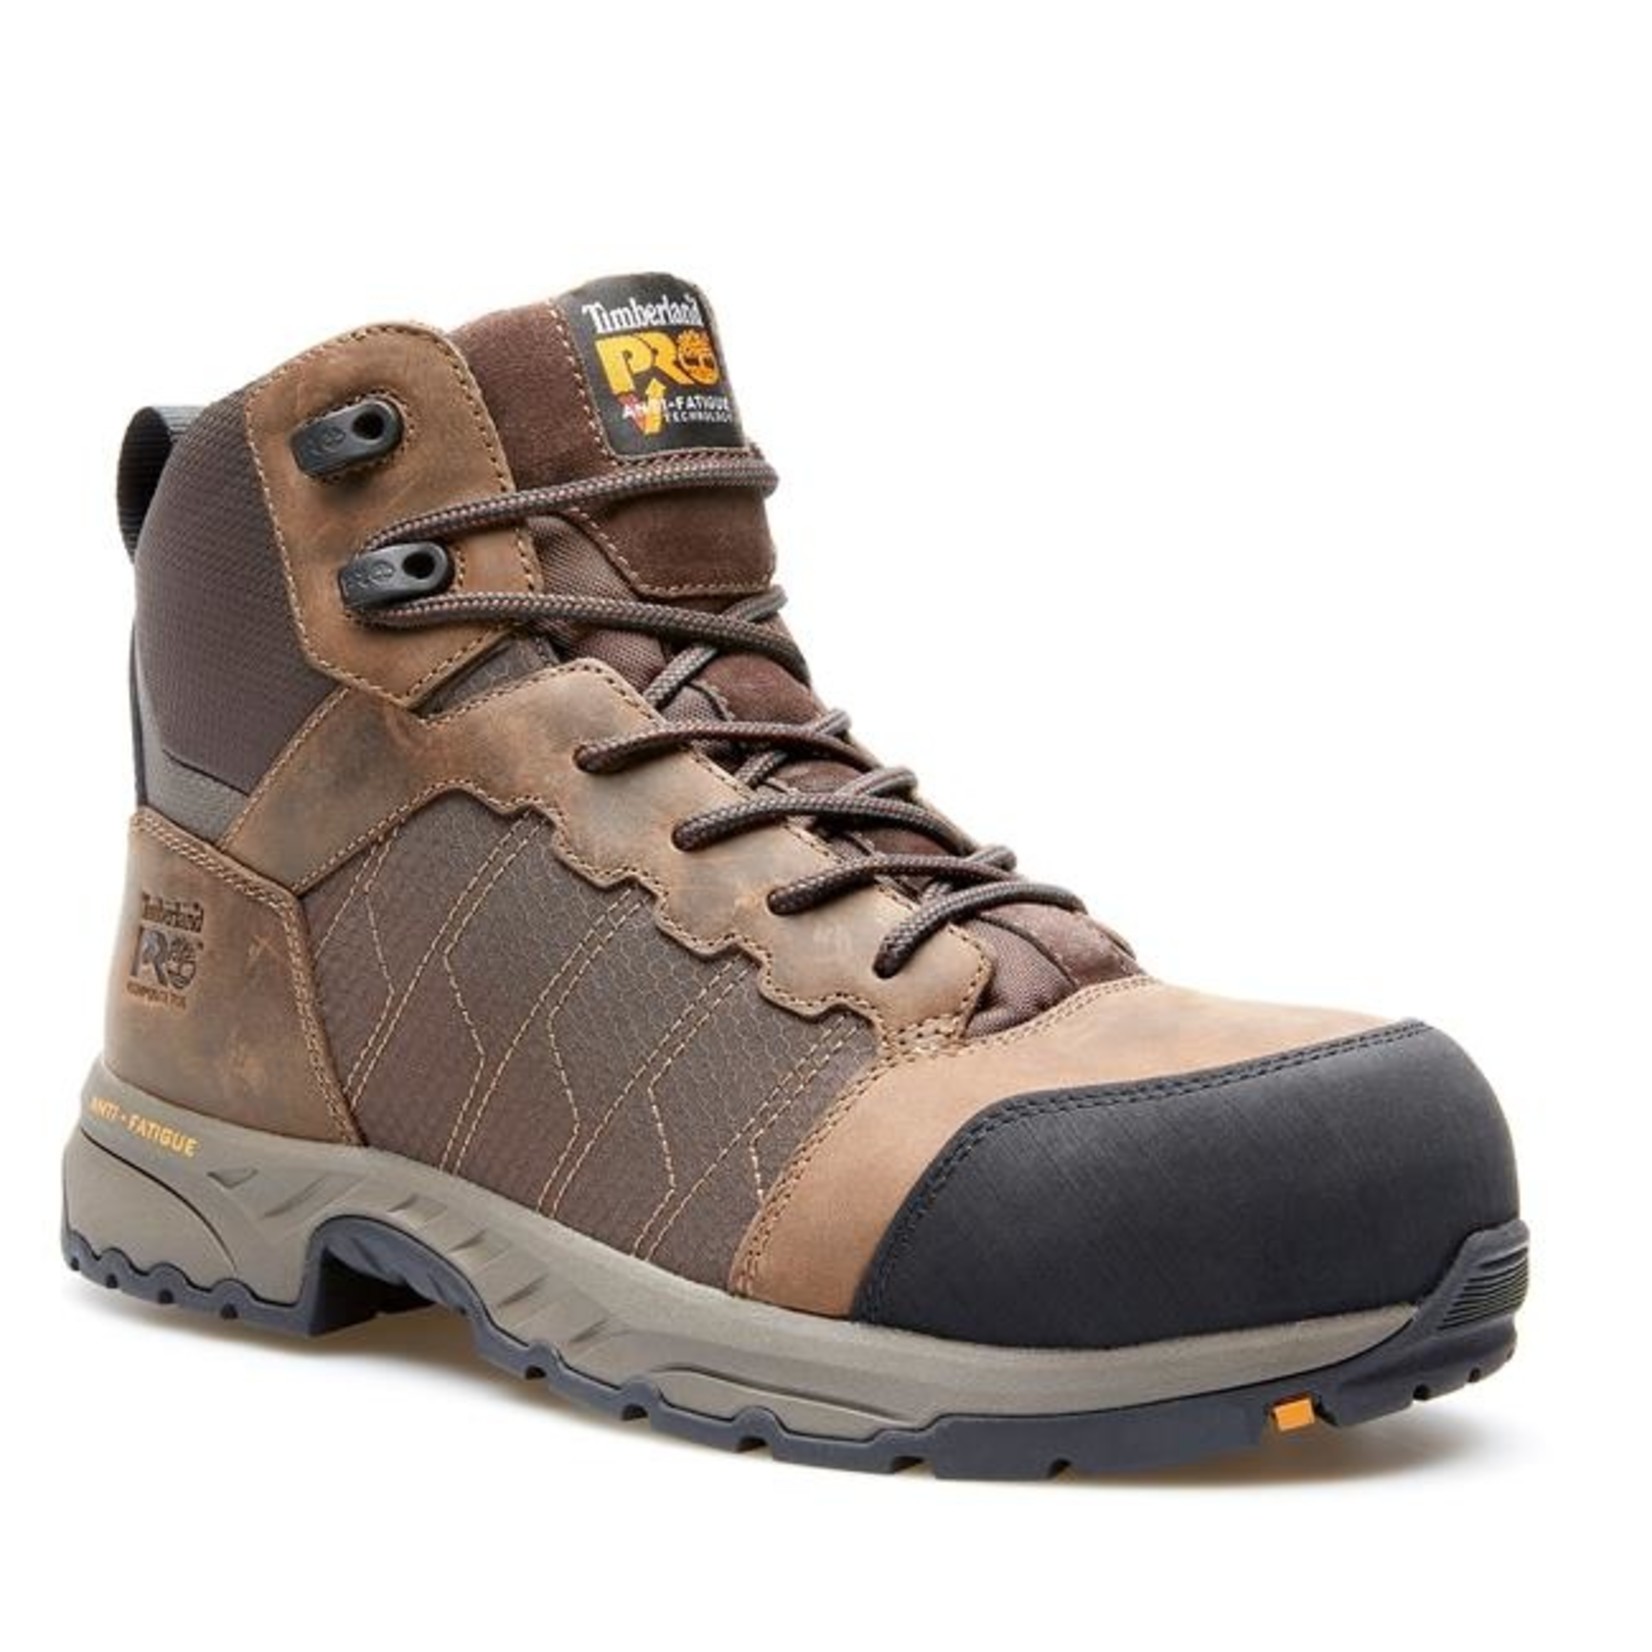 Timberland Timberland Pro A27JM Payload 6” Class 75/75 EH Men’s Composite Toe Safety Boots